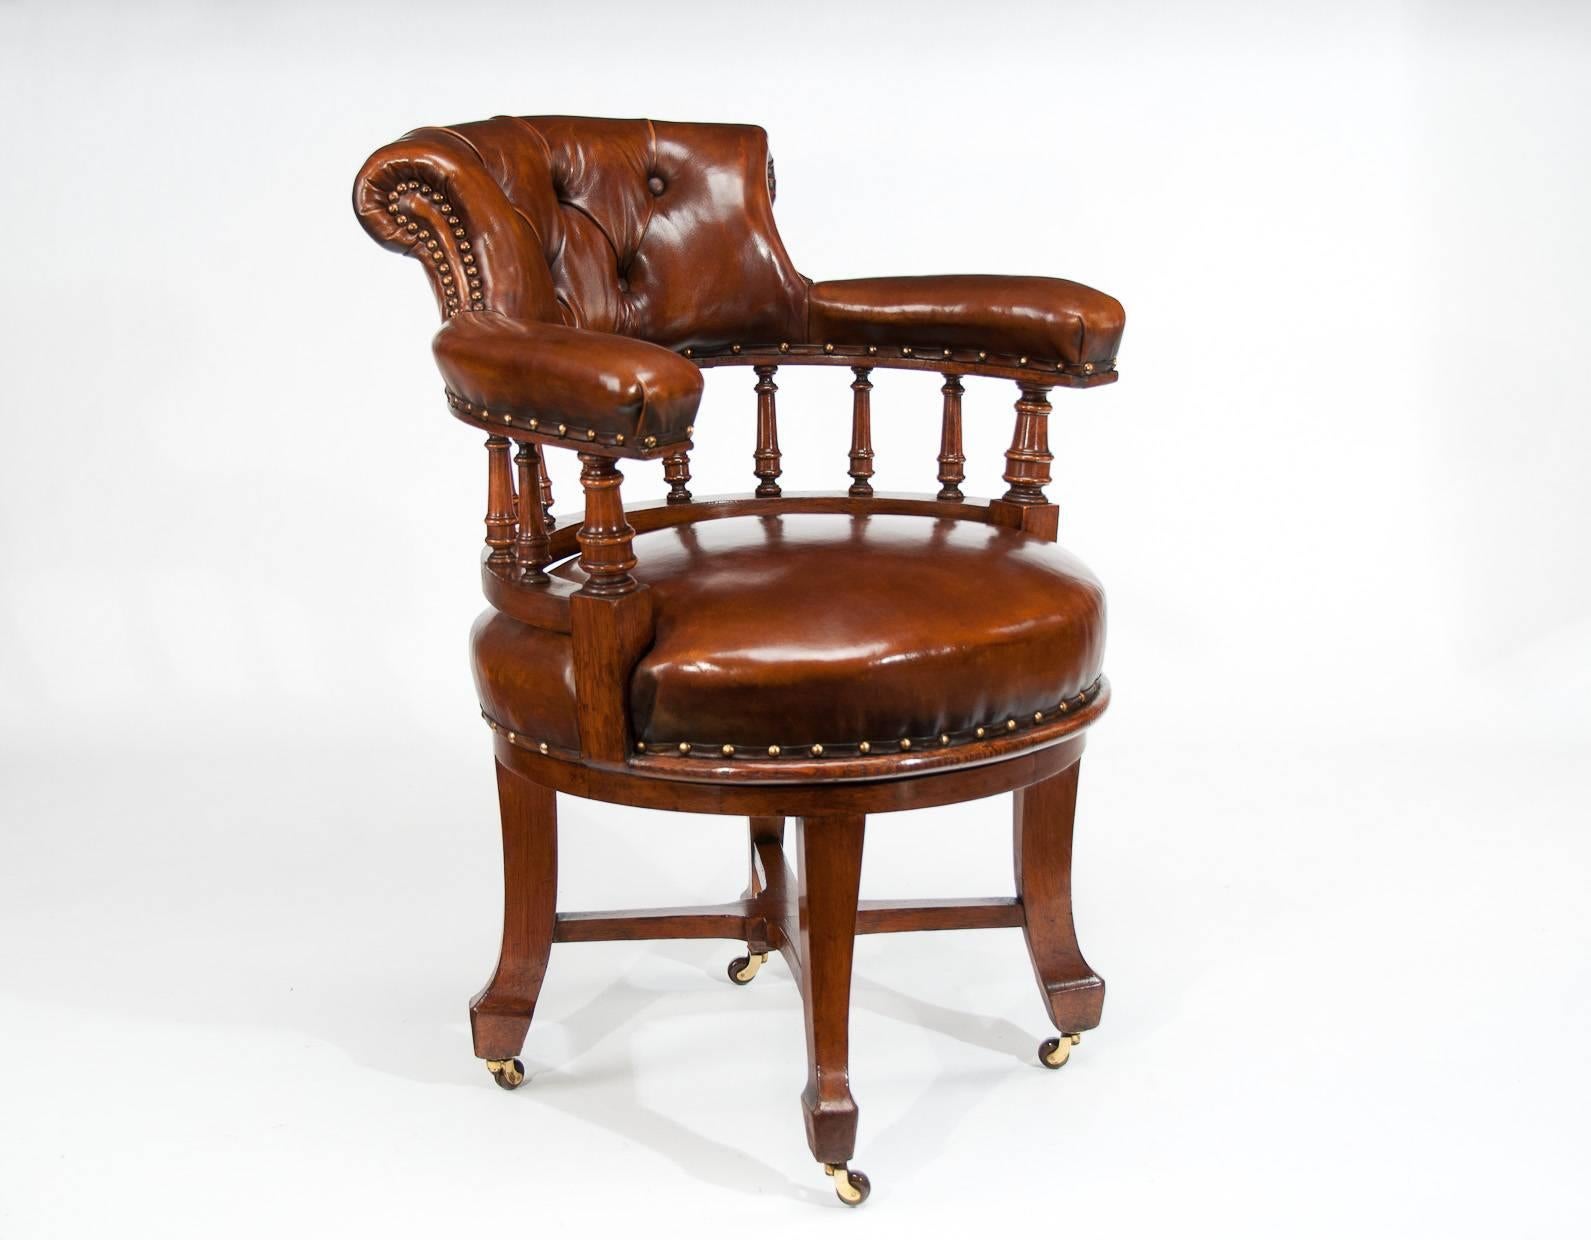 English Quality Victorian Oak Leathered Revolving Desk Chair by S & H Jewell